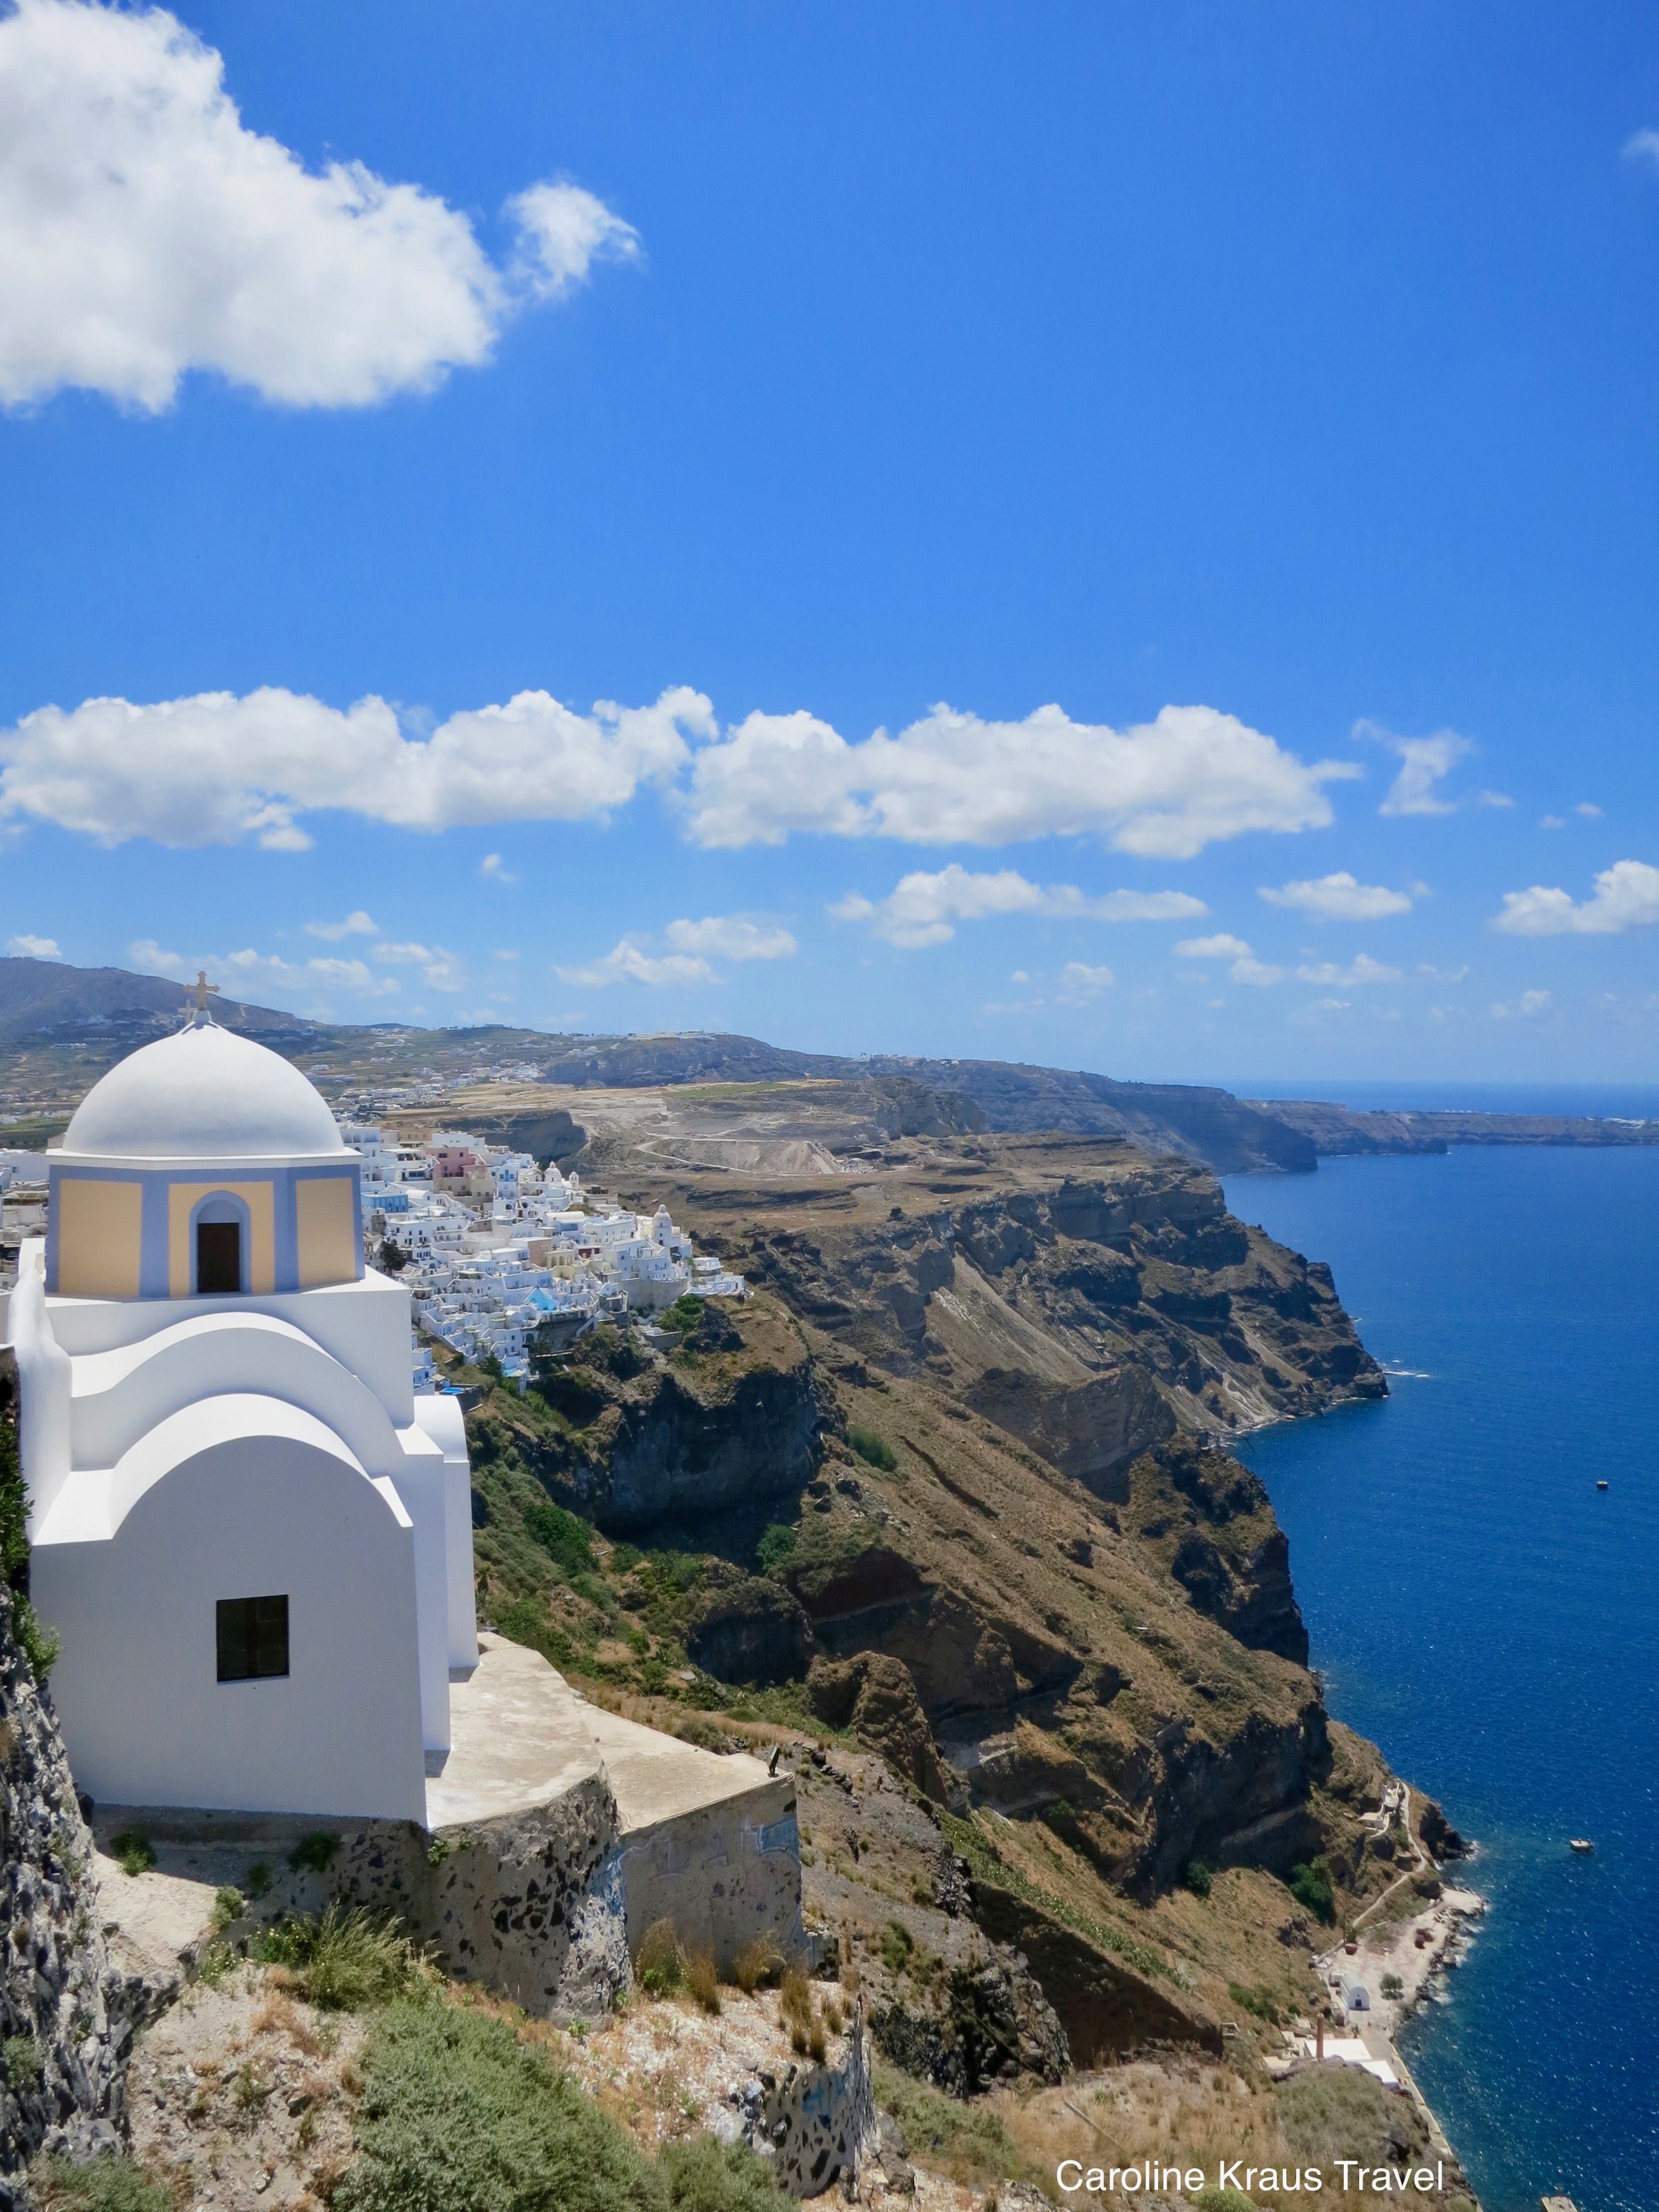 Which famous blue-domed church is a symbol of Santorini?